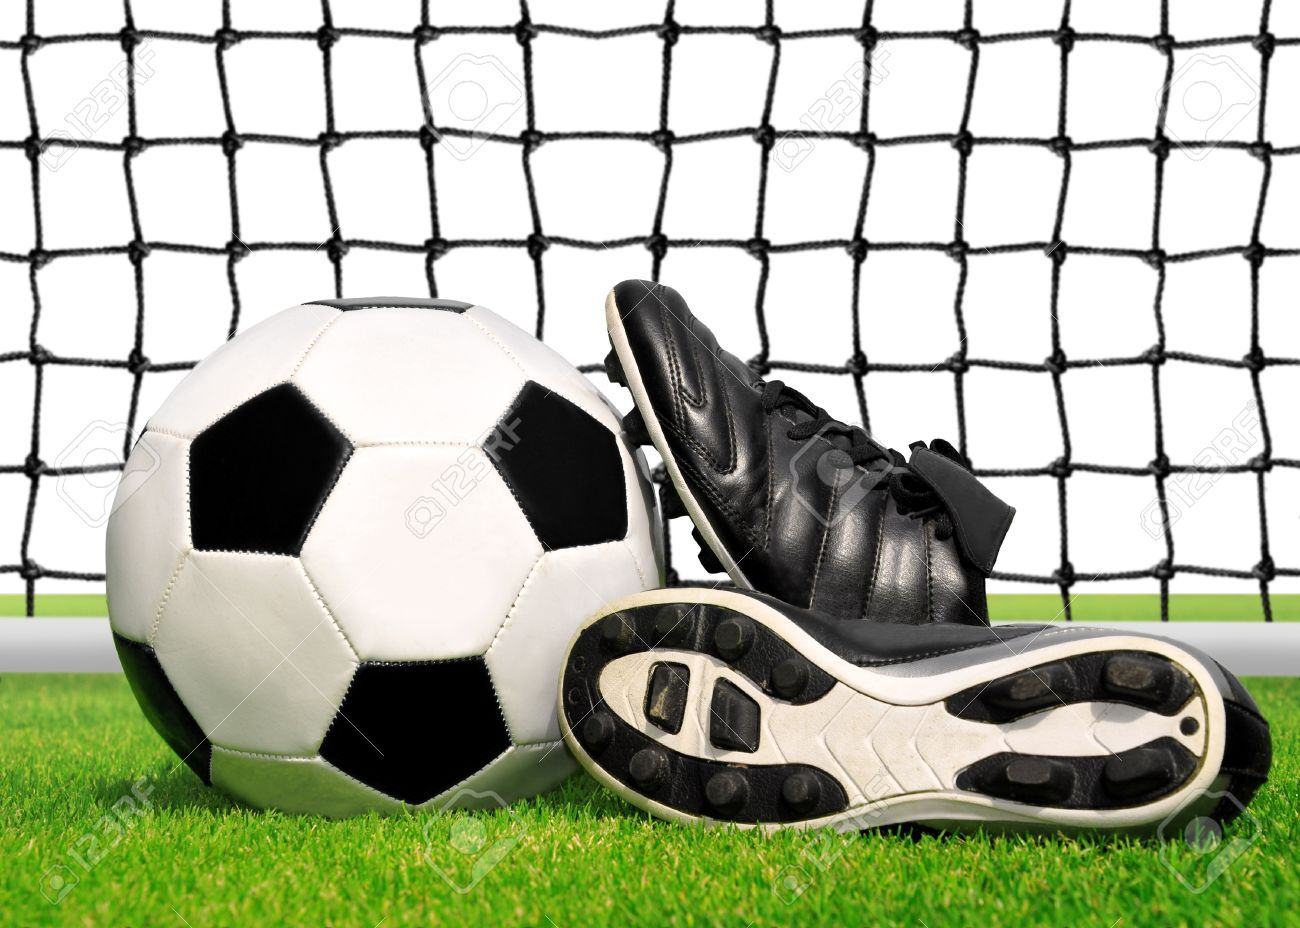 16225447 soccer ball and shoes in grass isolated